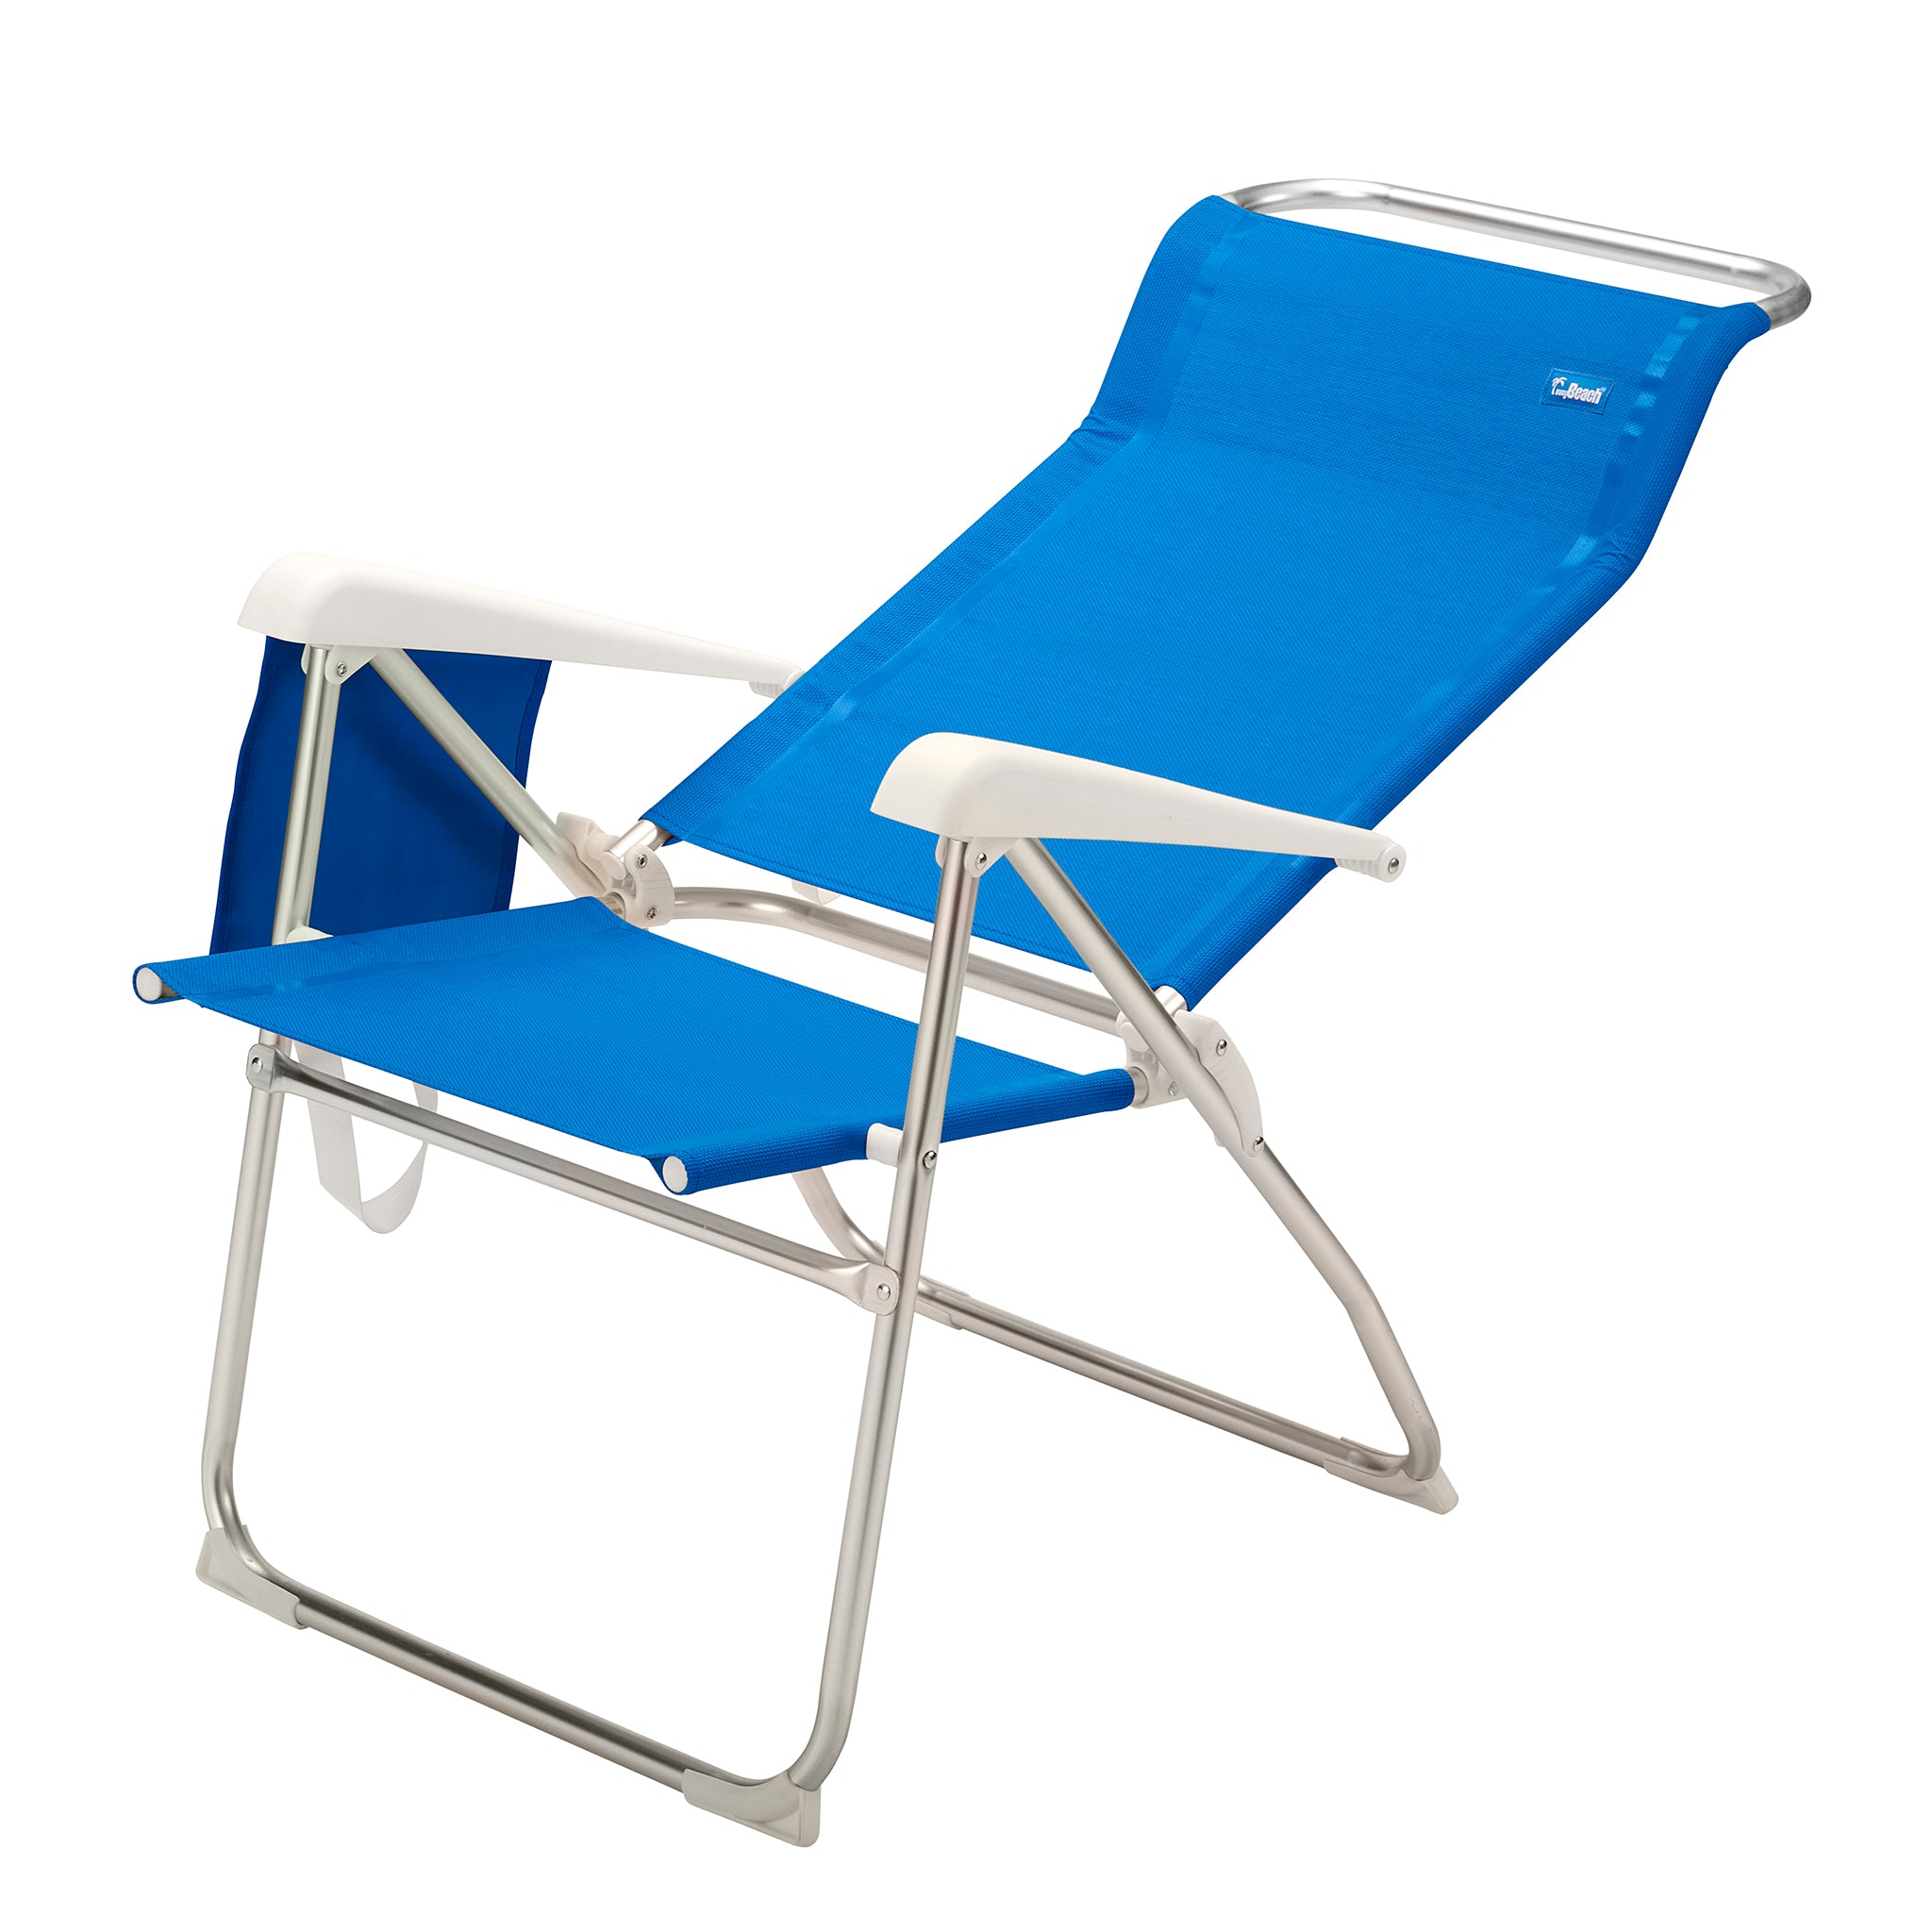 Set of Two (2) Tall 8-Postion Beach Chairs